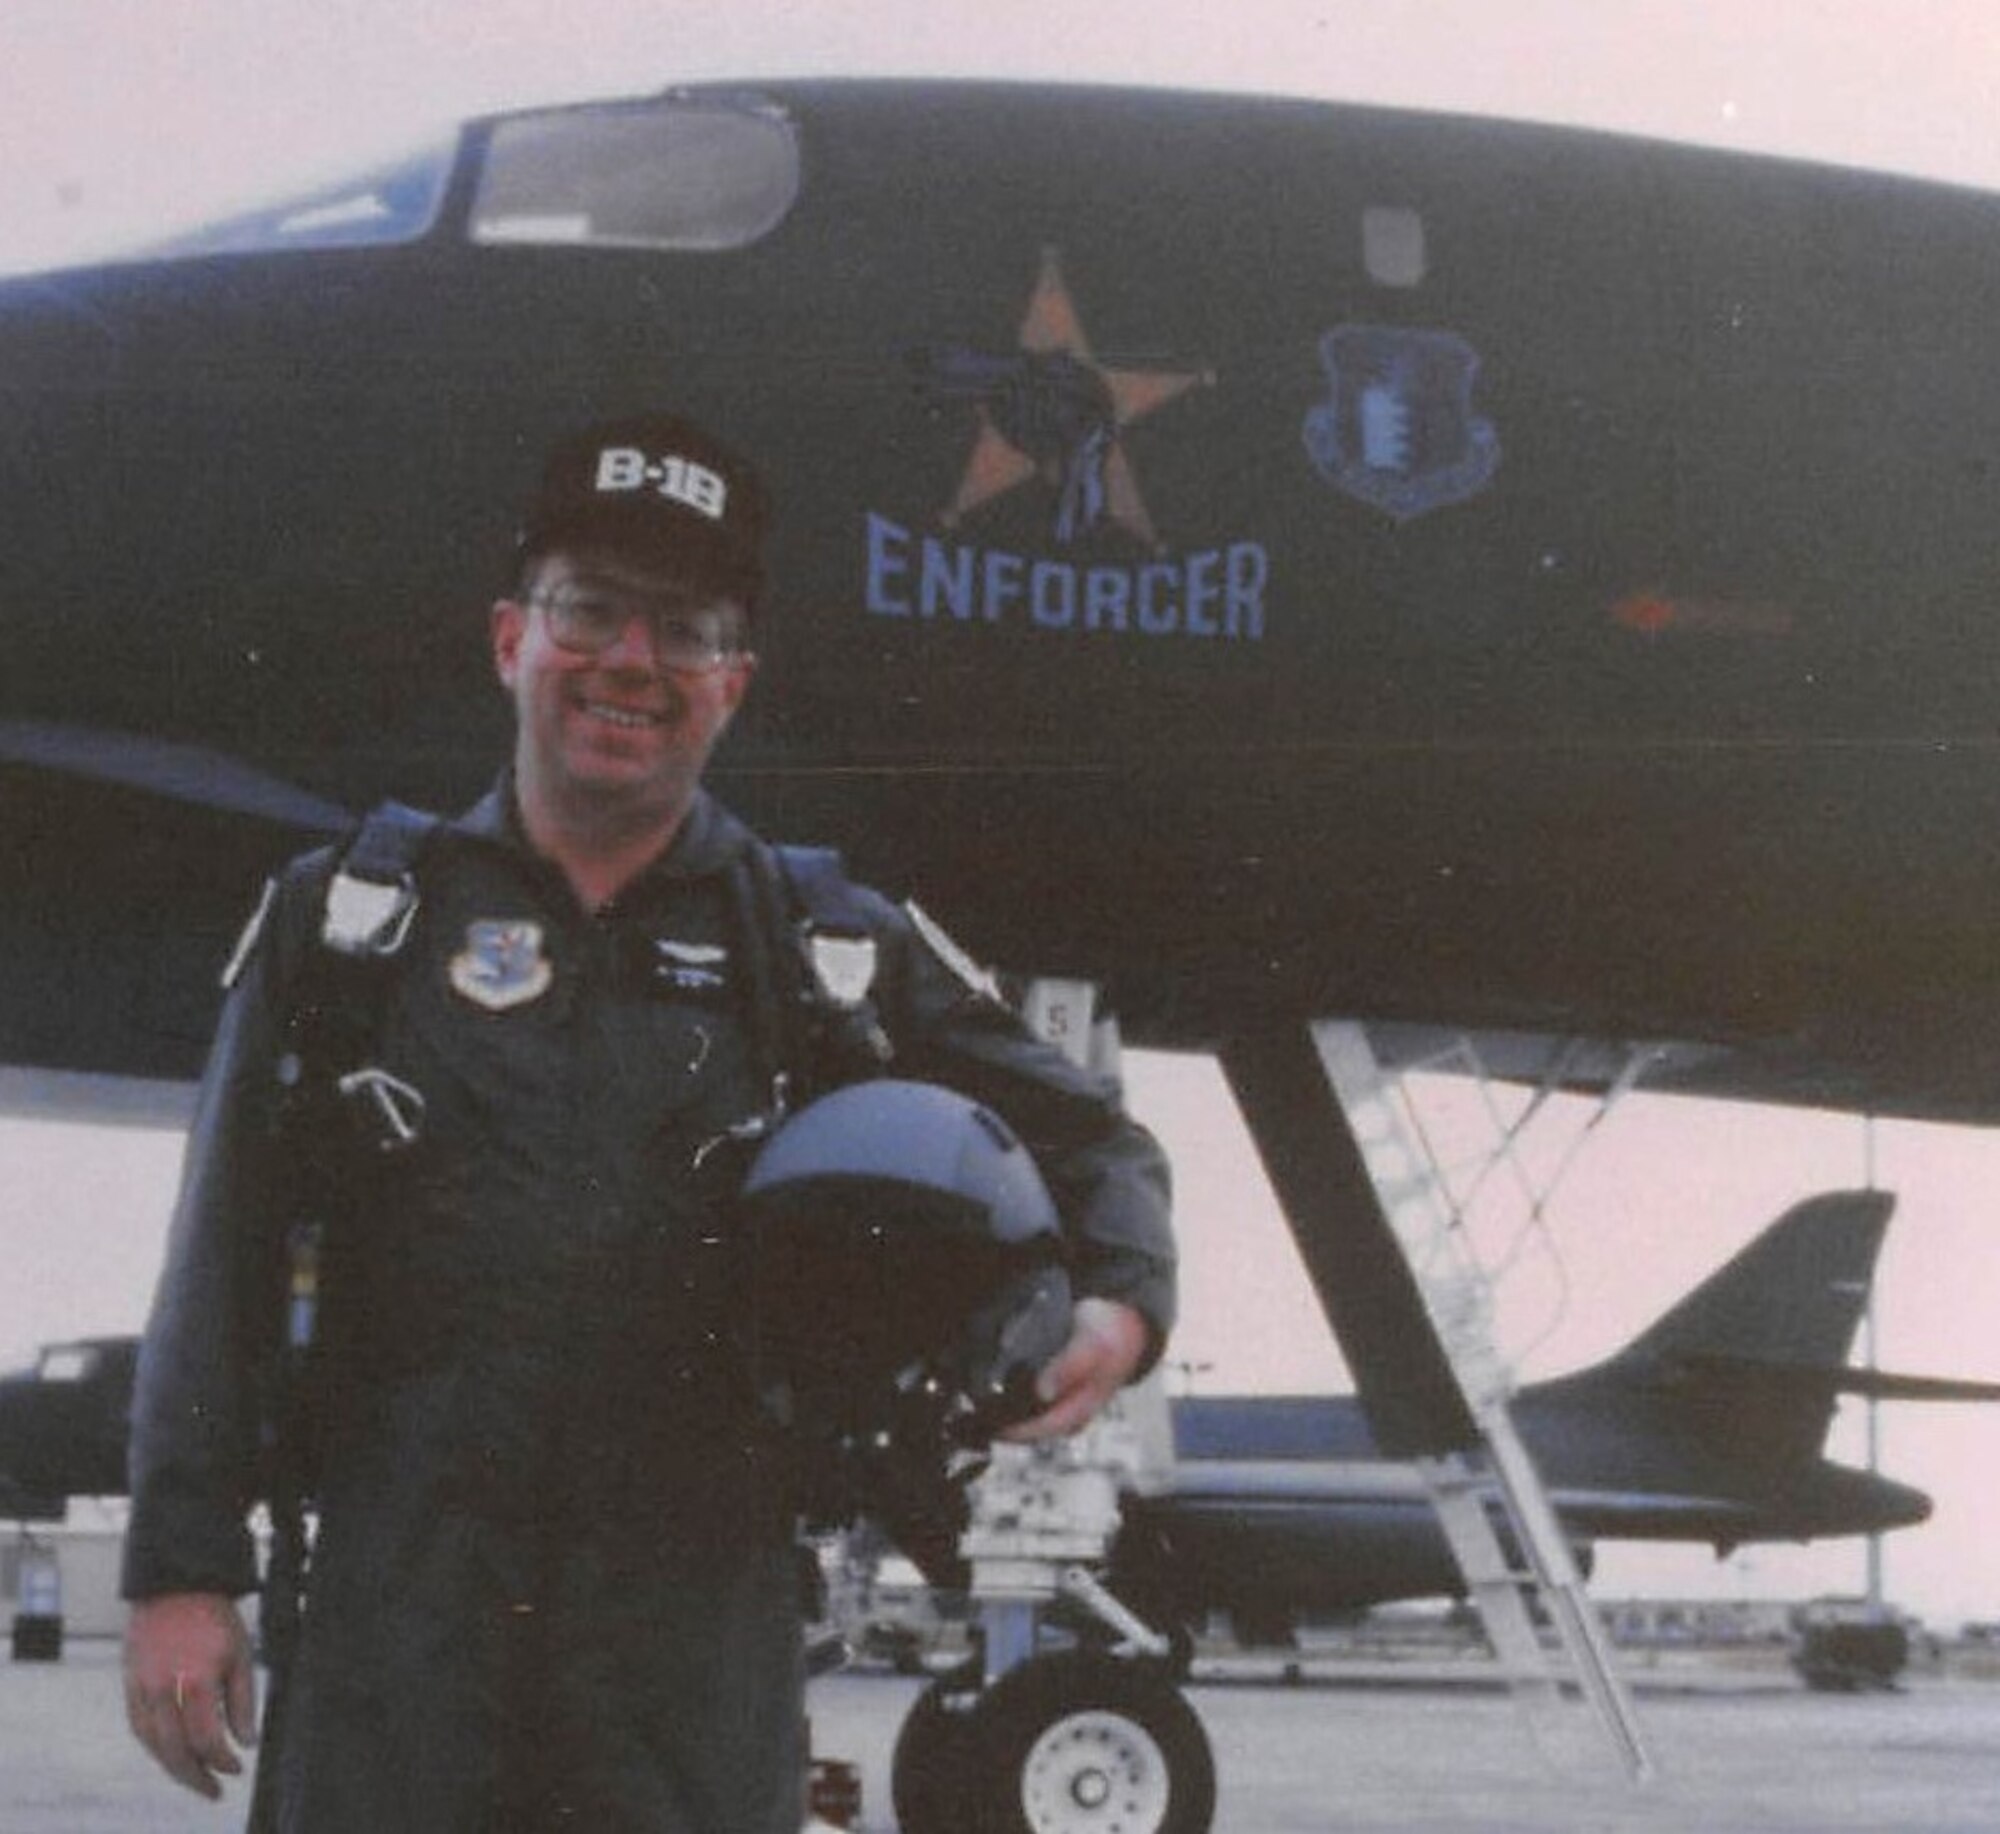 Alton Cornella, a civic leader and former business owner, stands in front of a B-1 bomber after an incentive flight at Ellsworth Air Force Base, S.D., in 1995. Serving as the honorary commander for both the 44th Missile Group and the 28th Bomb Wing, Cornella has worked closely with military leaders at all levels, and continues to serve as an active member of the South Dakota Board of Military Affairs. (Courtesy Photo)